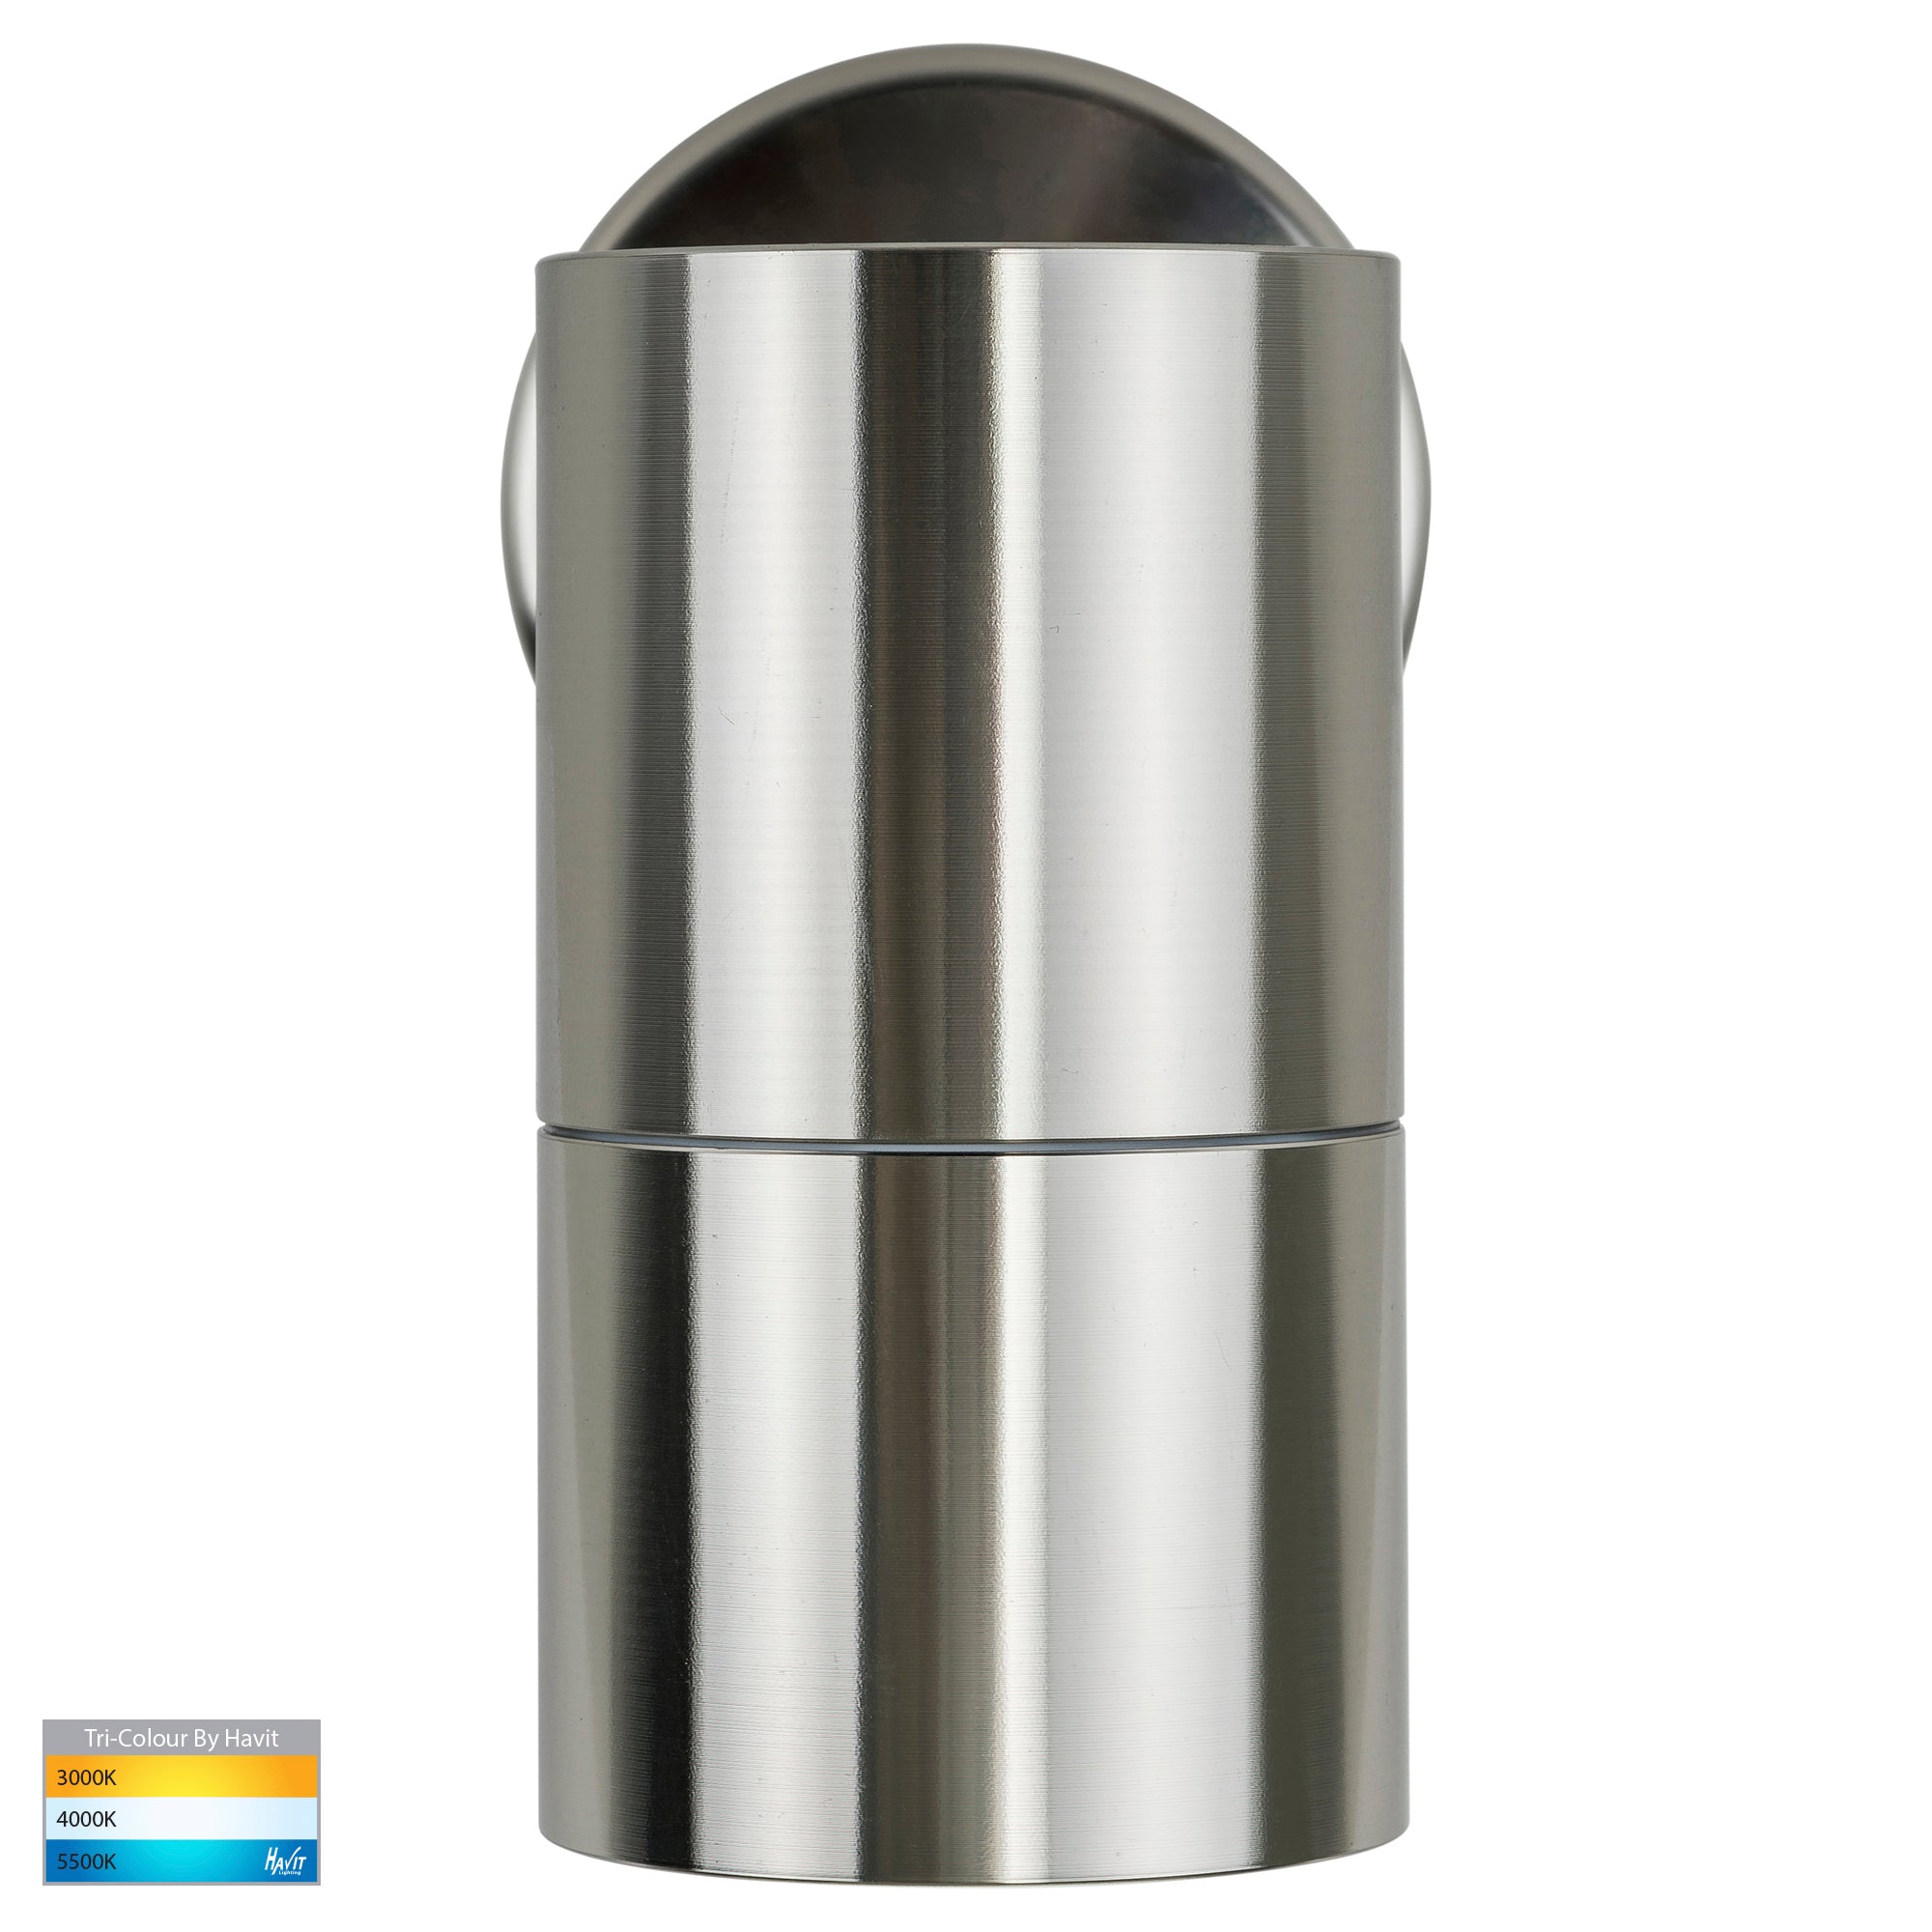 HV1105T-HV1107T - Tivah 316 Stainless Steel TRI Colour Fixed Down Wall Pillar Lights